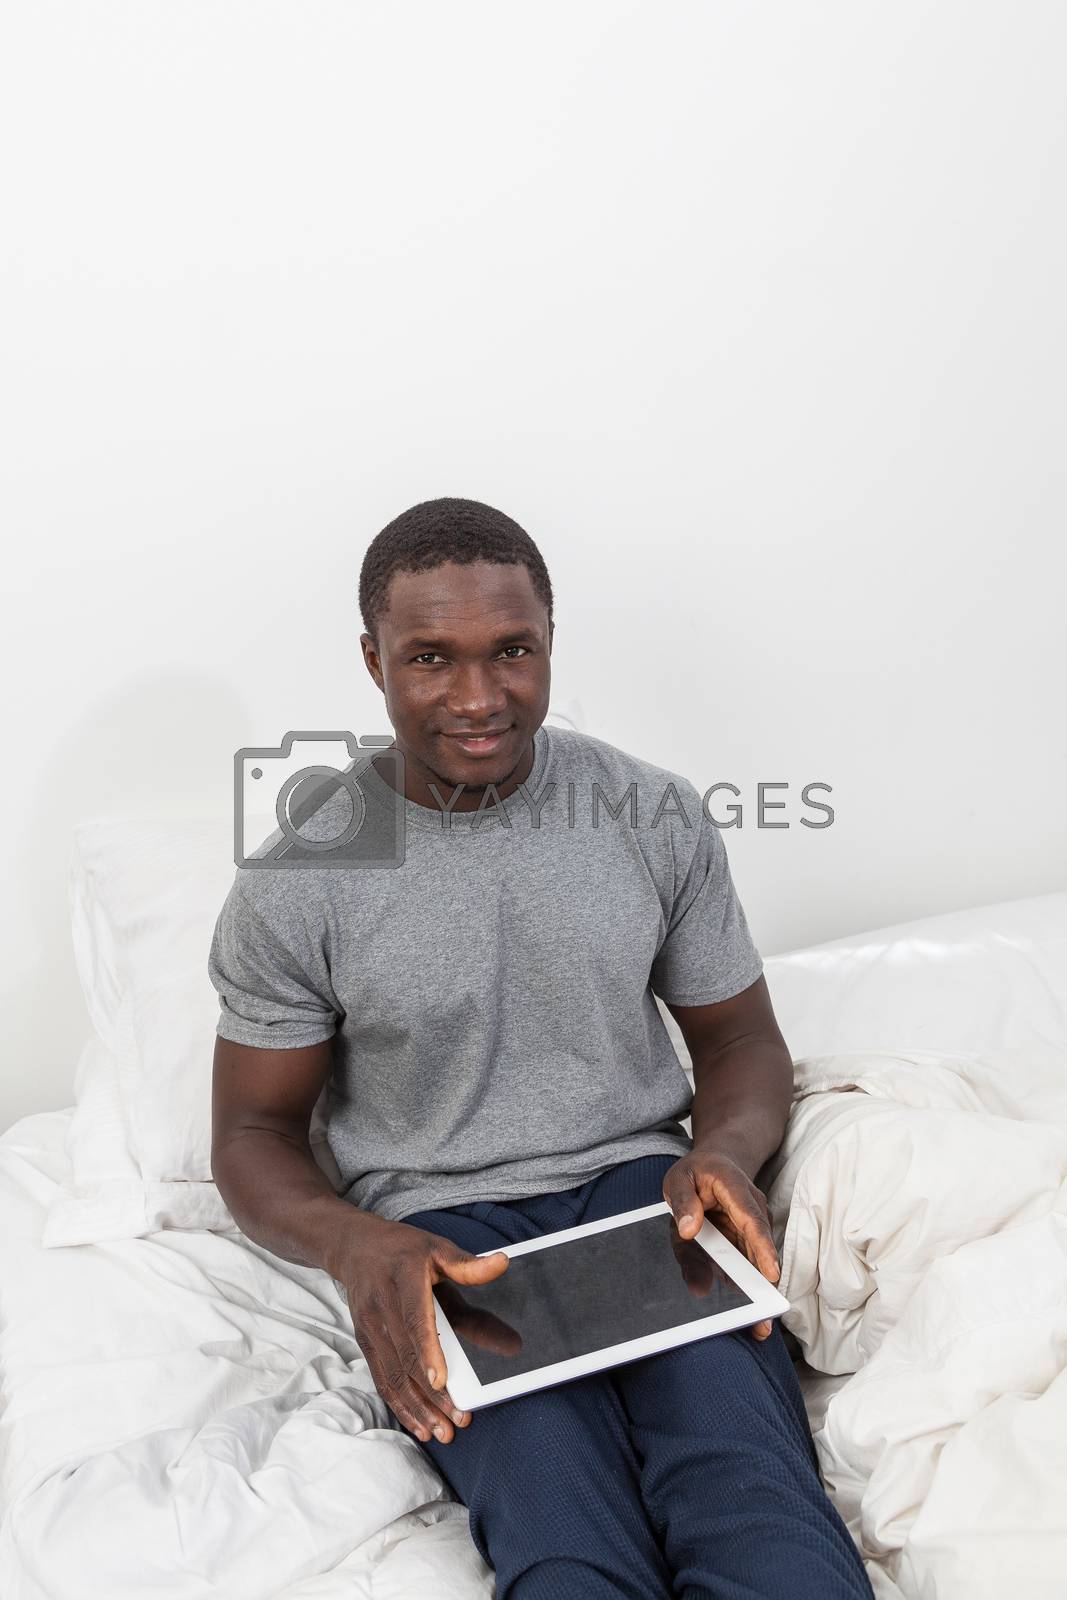 Royalty free image of Man looking at camera and touching his tablet by ifilms